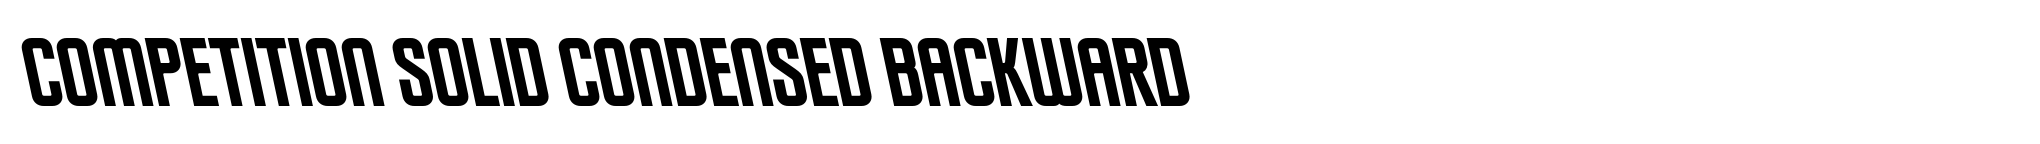 Competition Solid Condensed Backward image